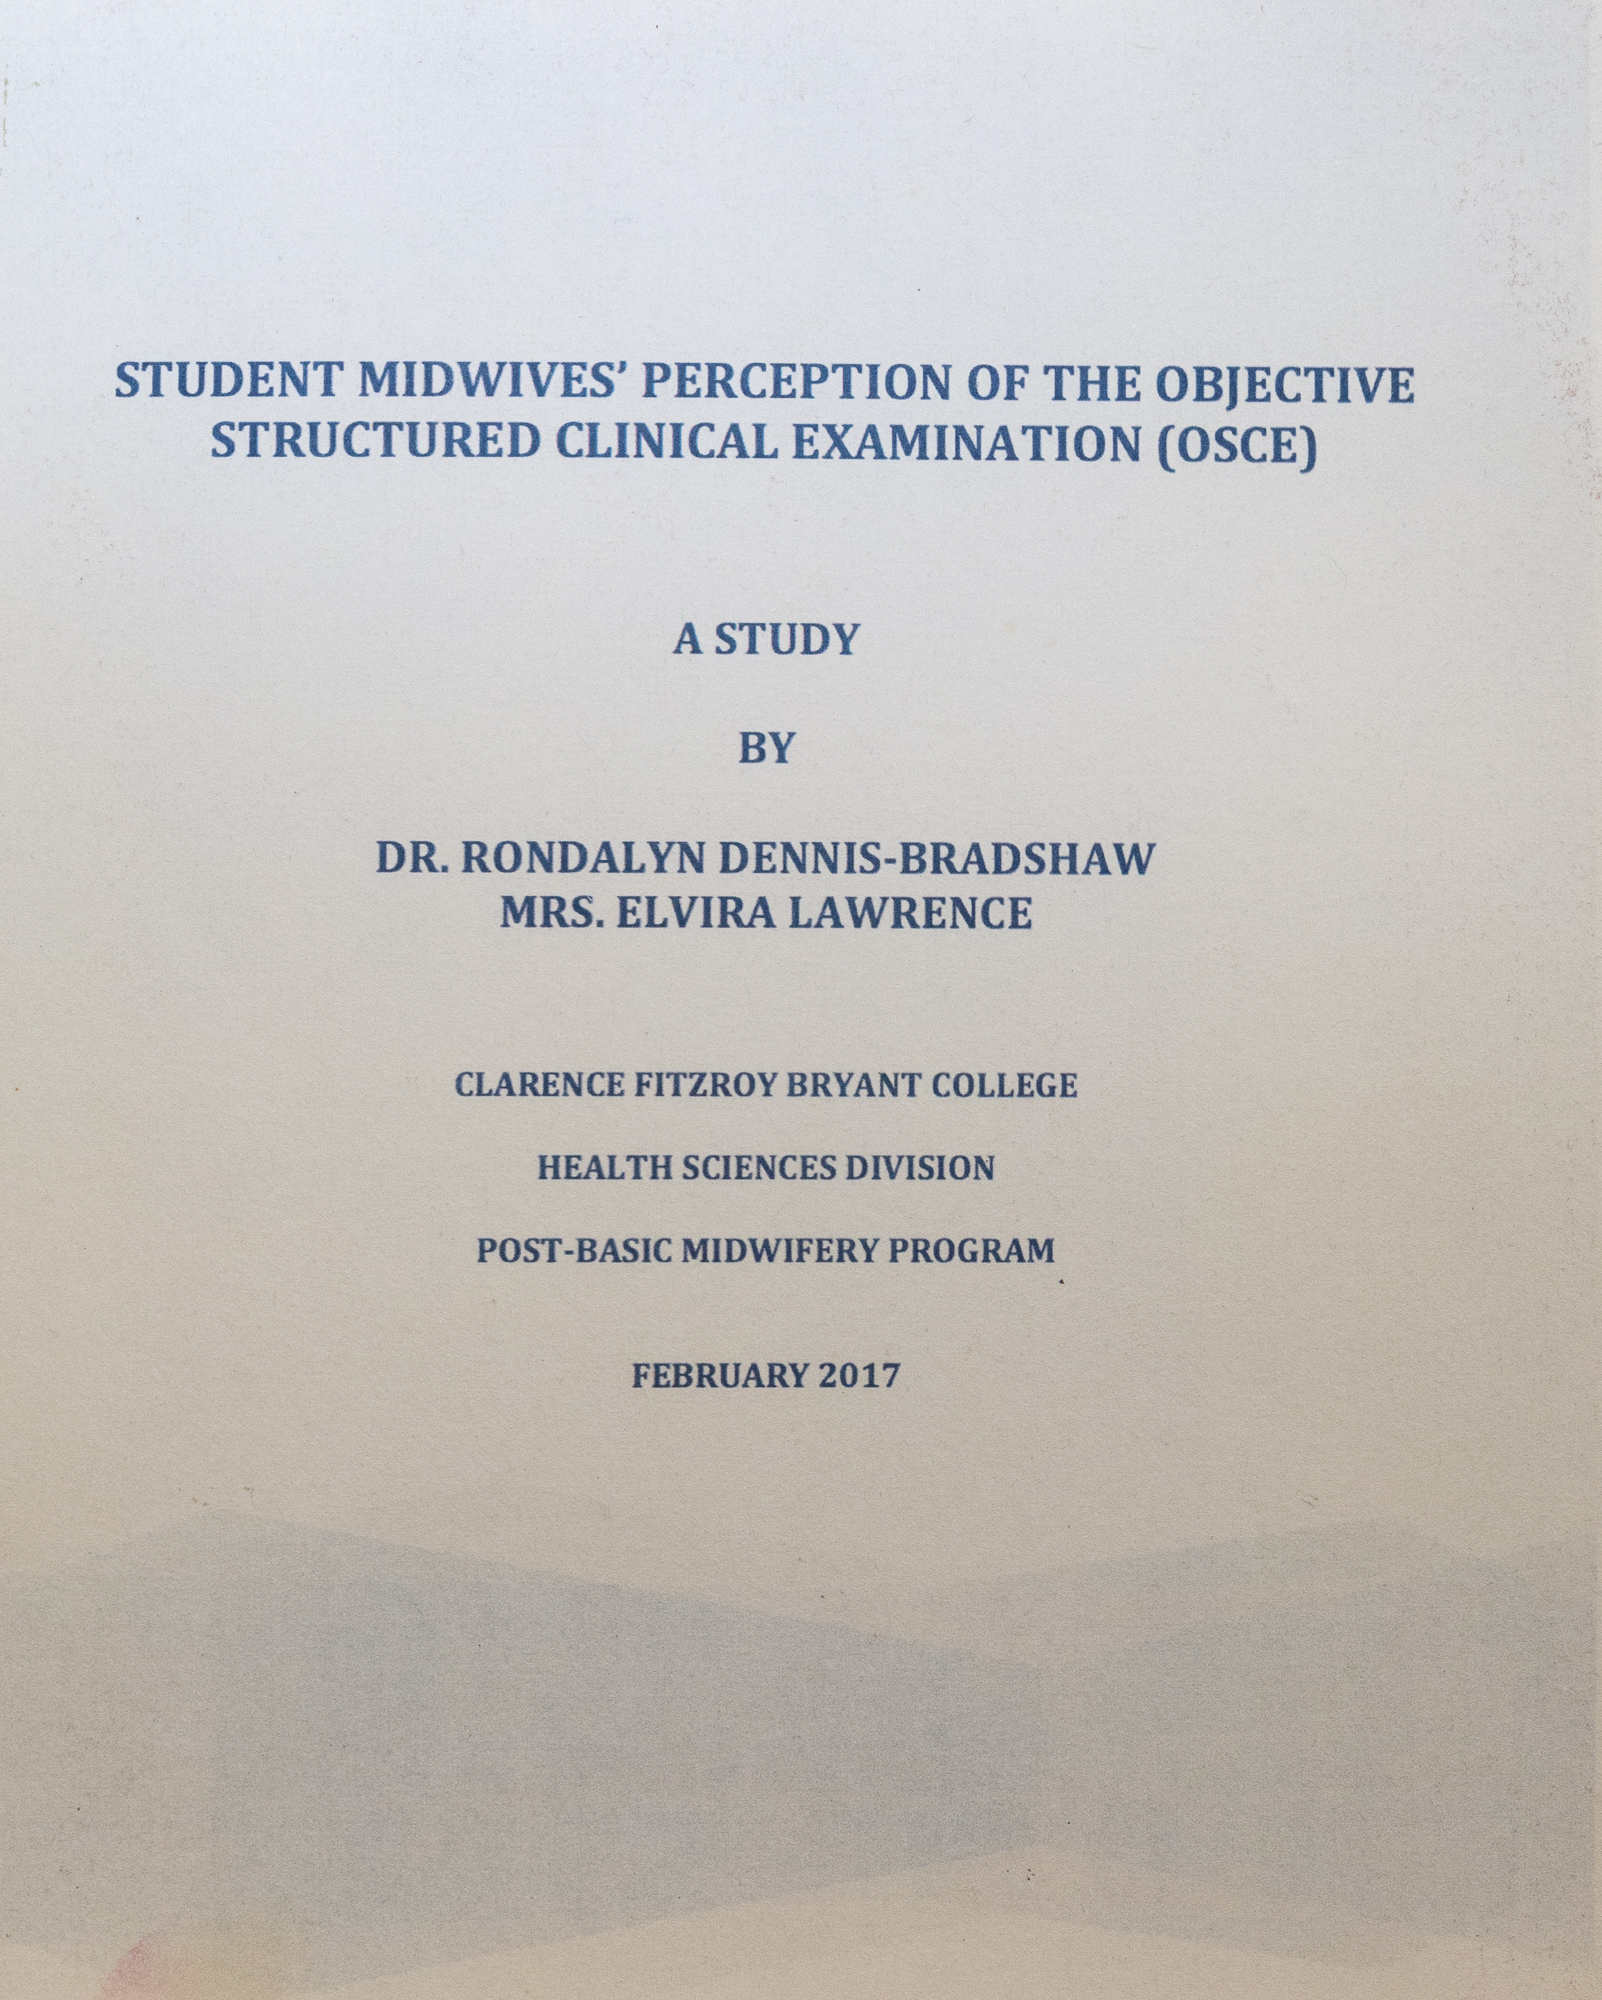 Student Midwives Perception of the Objective Structured Clinical Examination (OSCE)